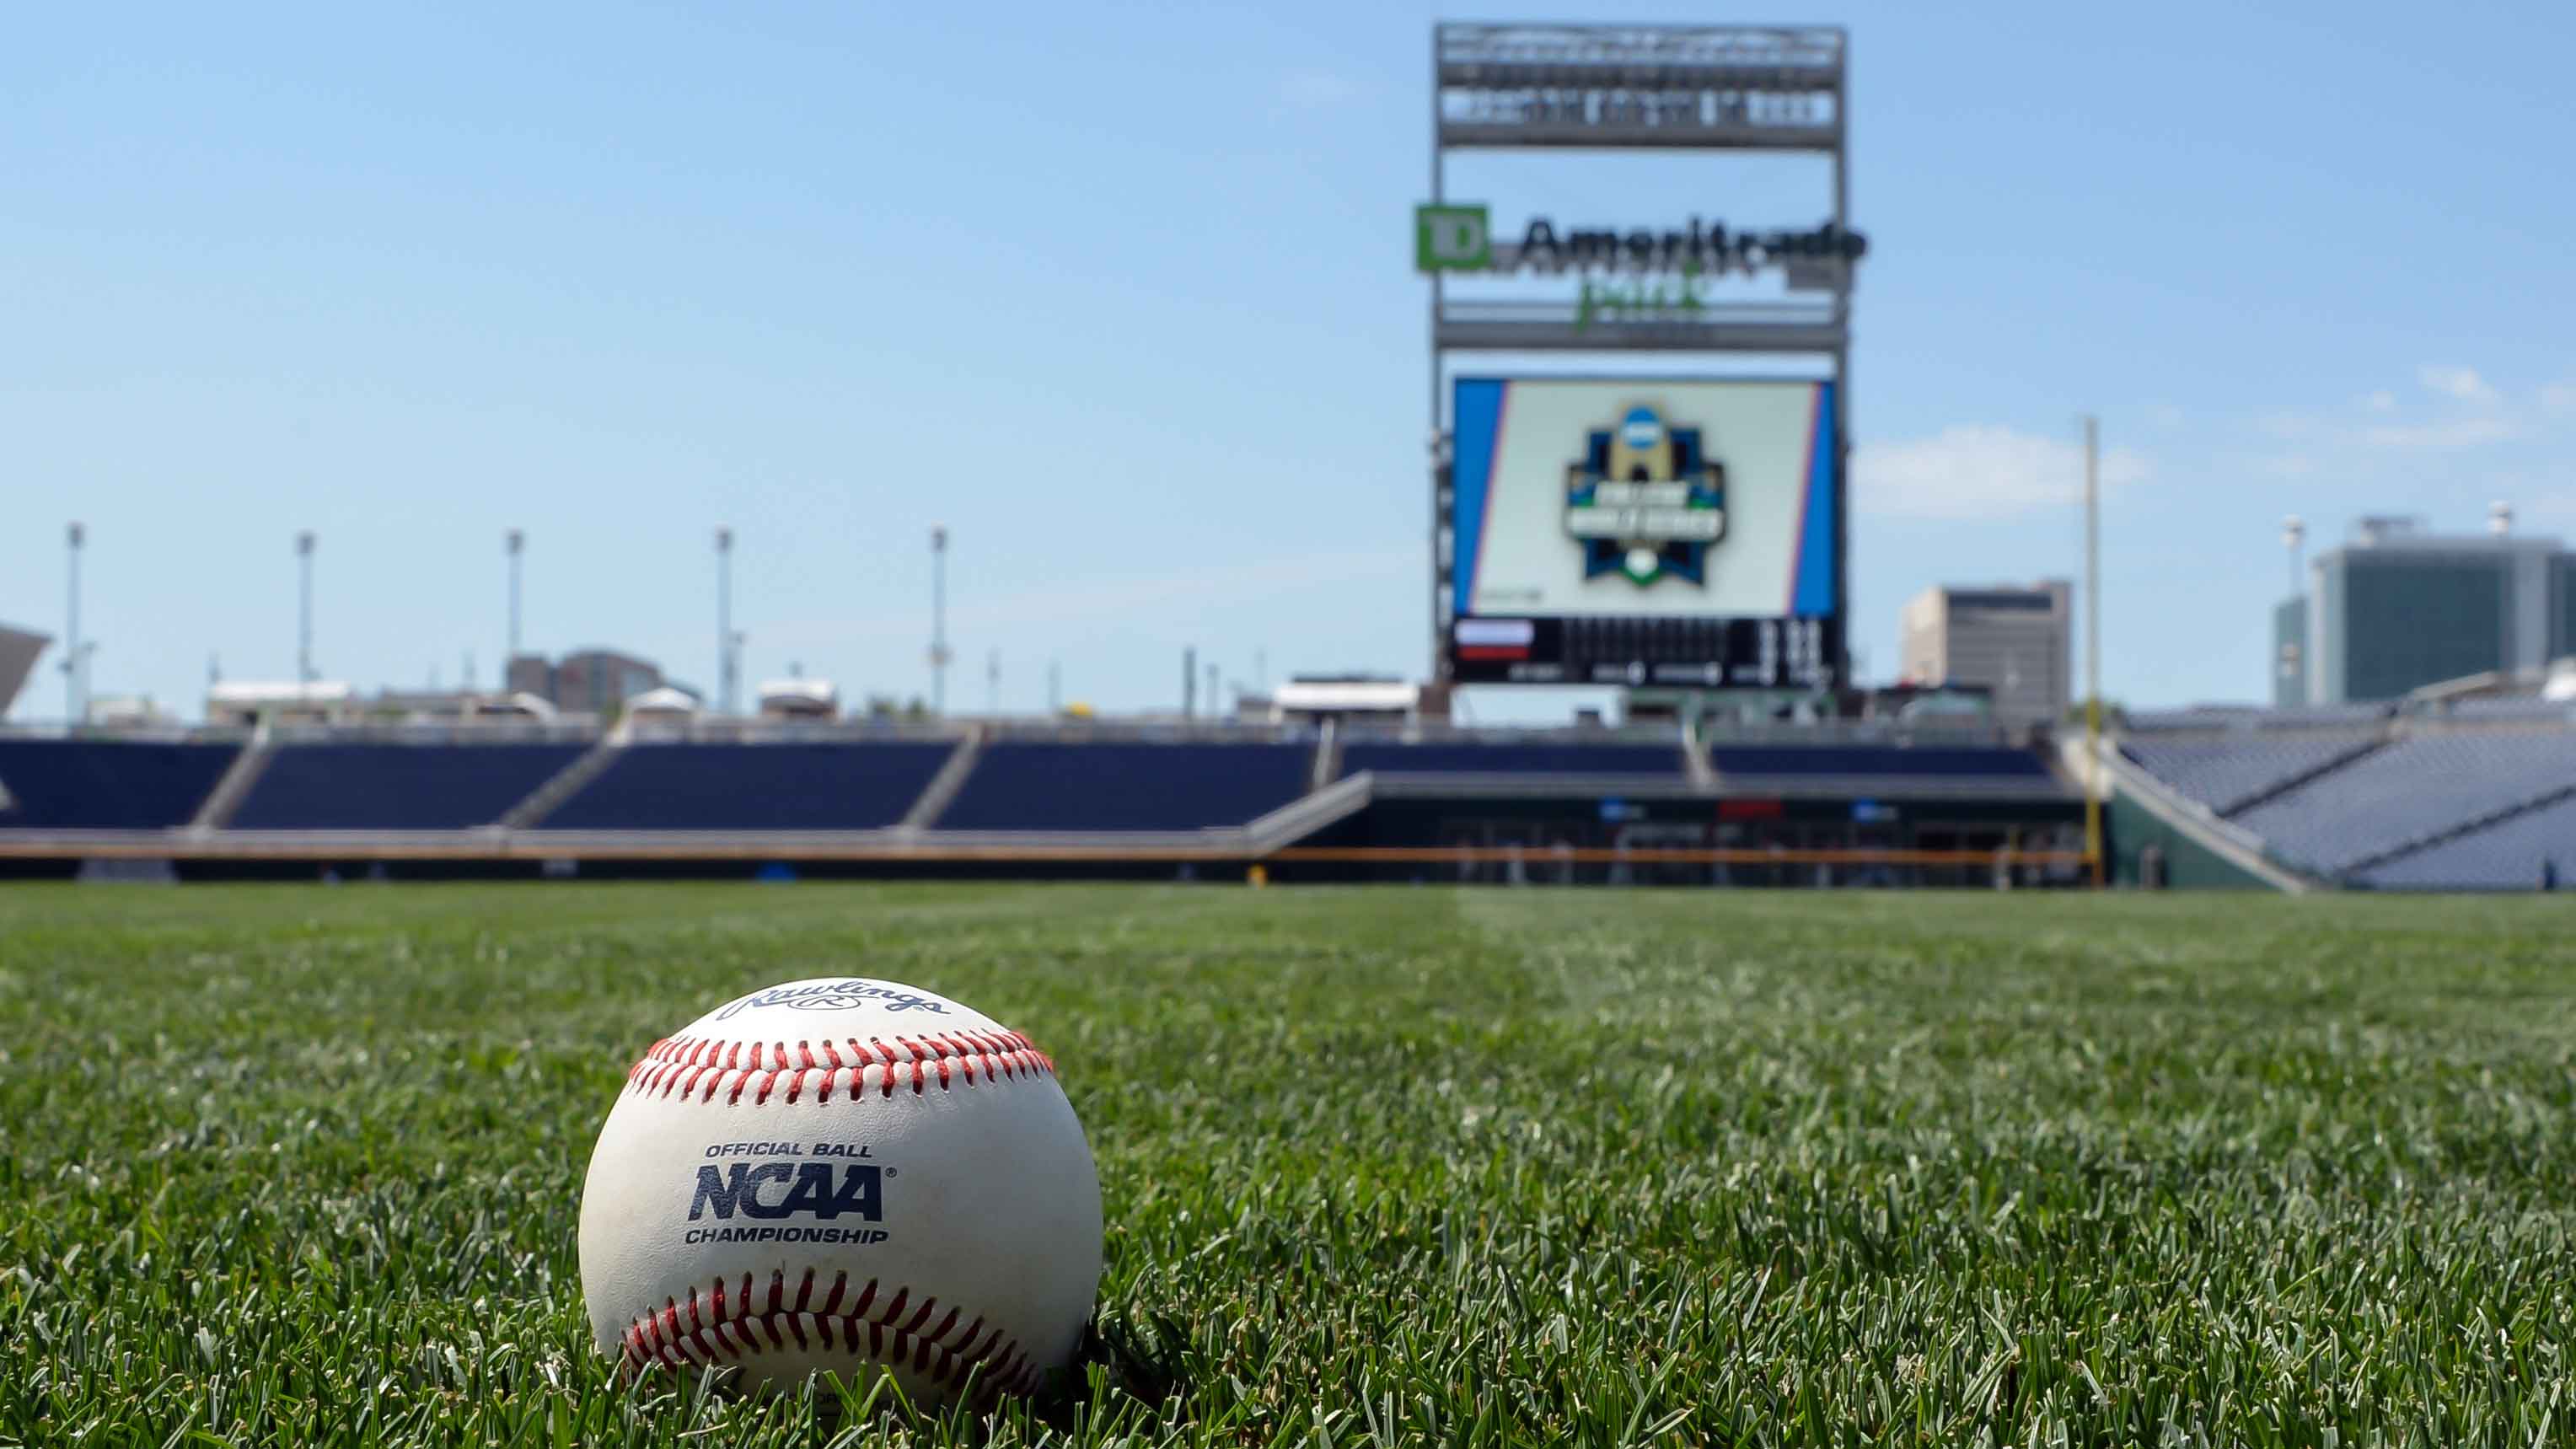 How to watch the 2022 College World Series